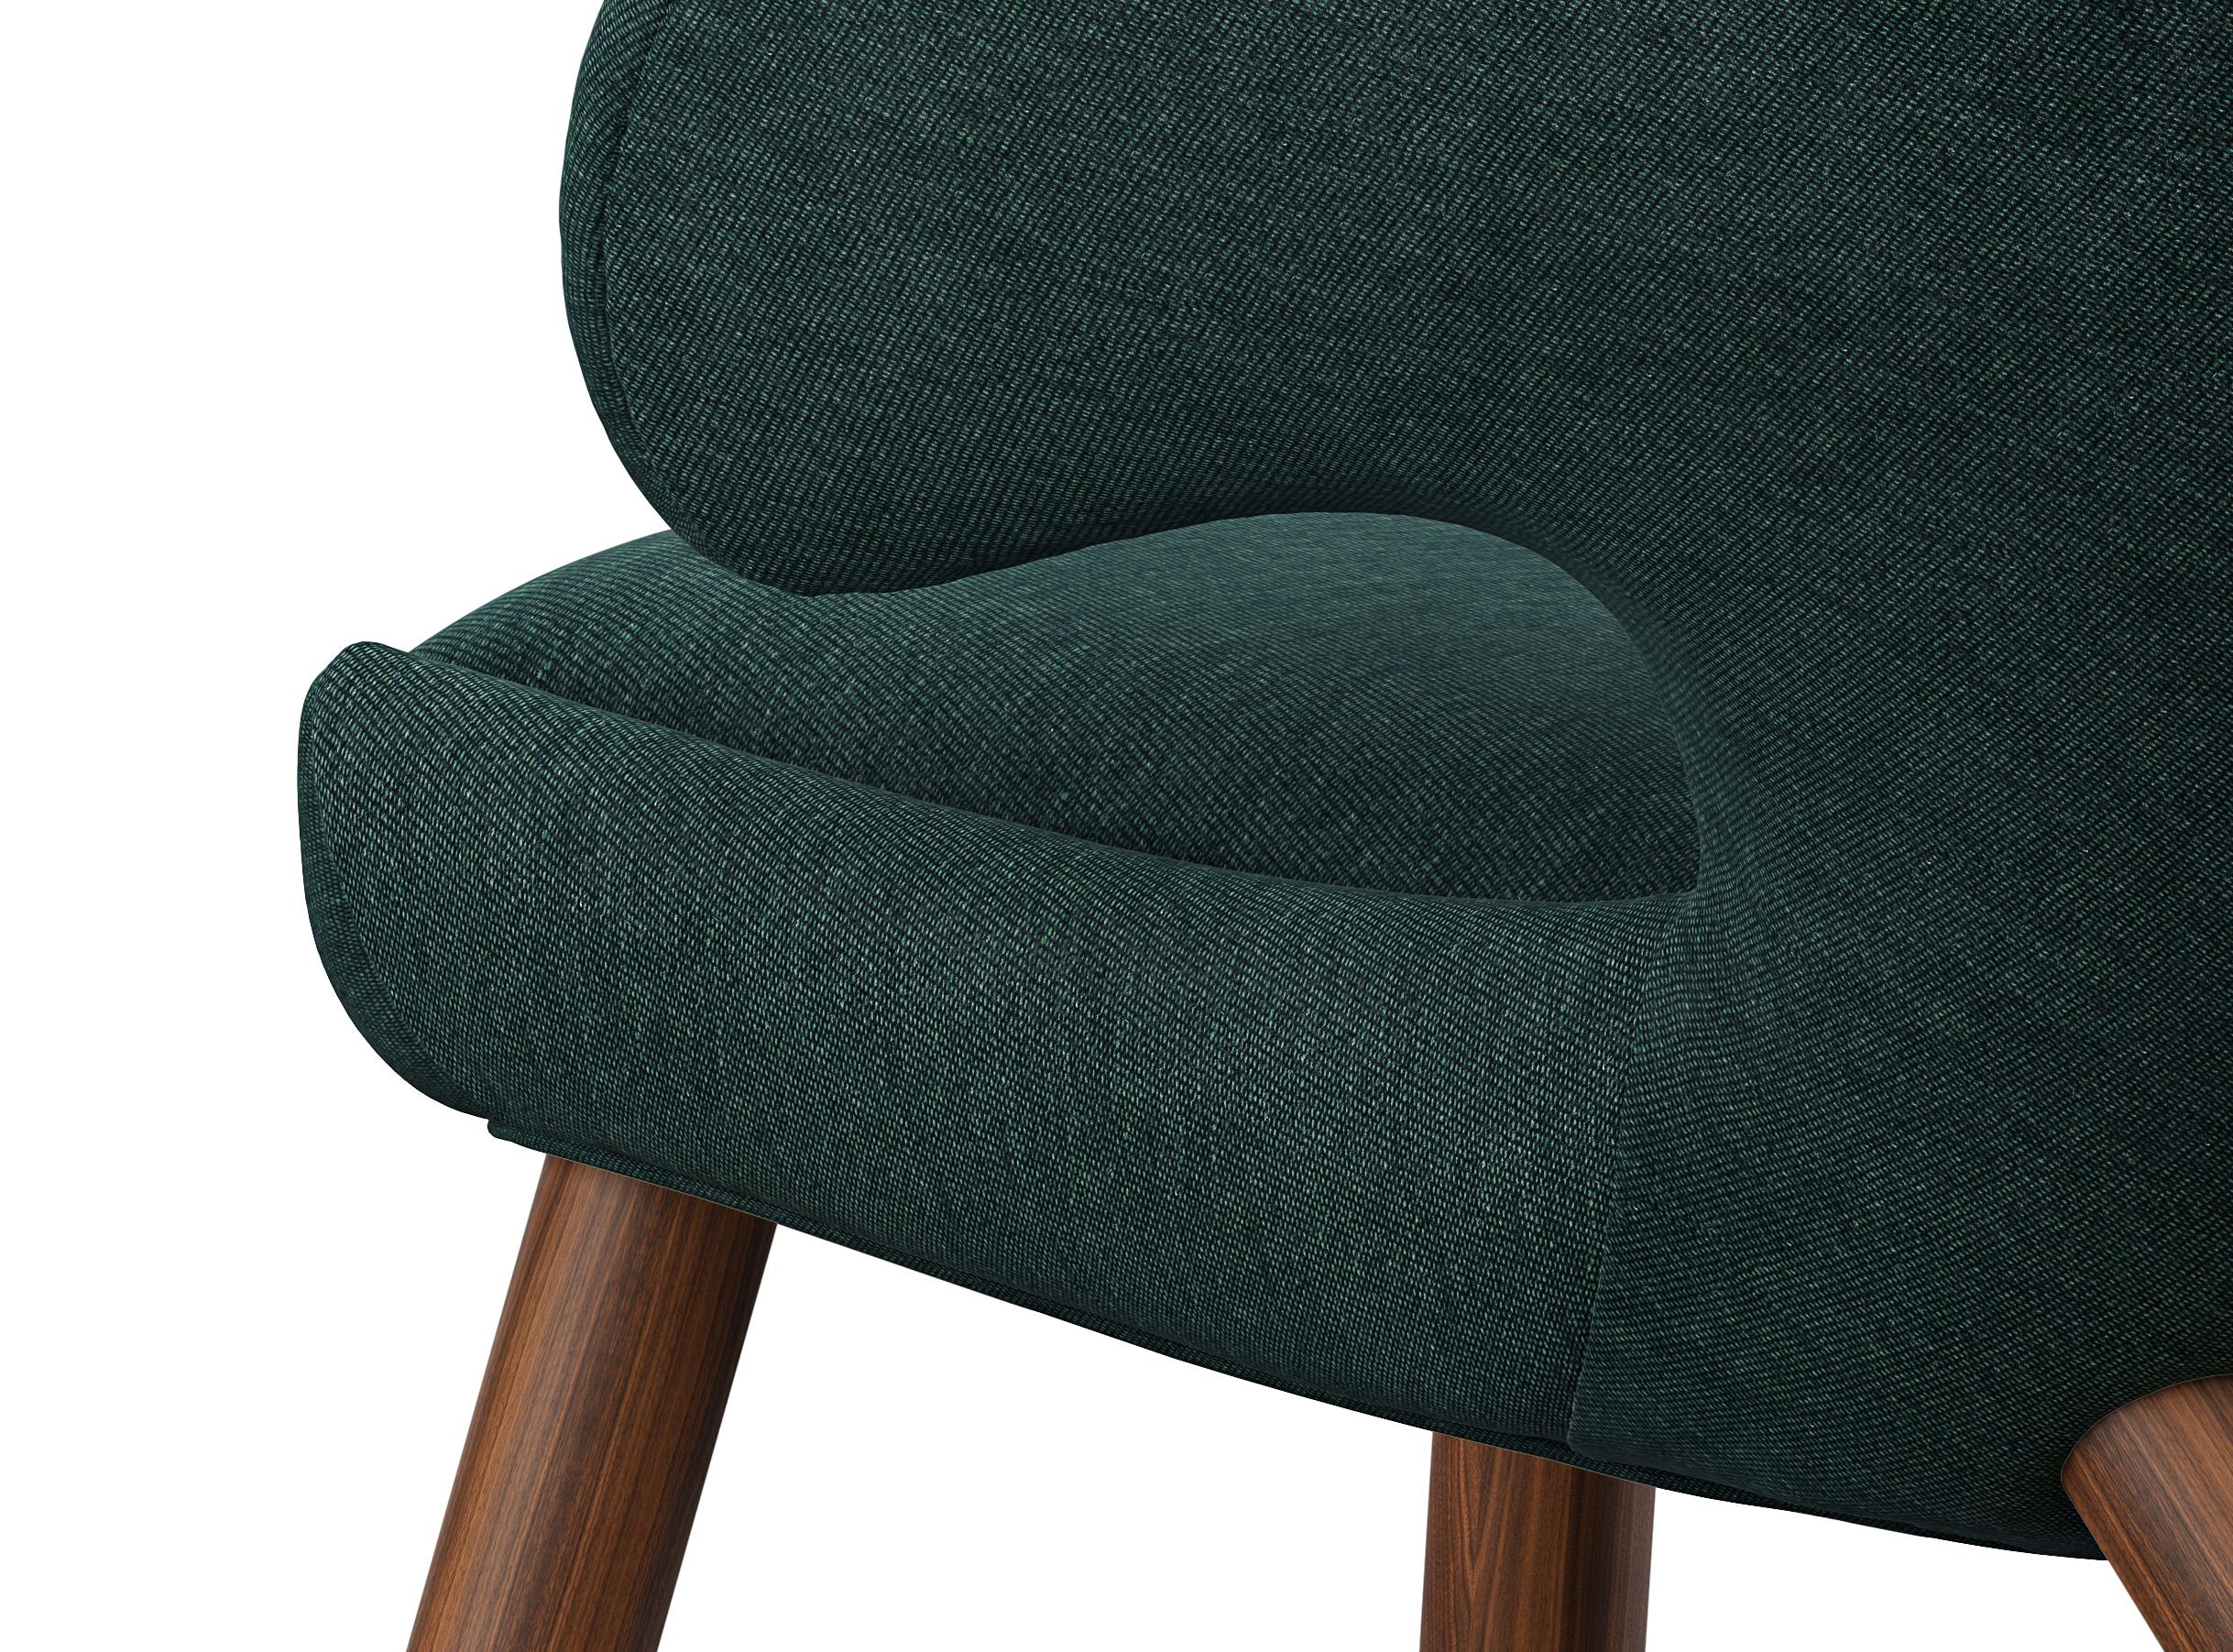 Contemporary Set of Four Finn Juhl Pelican Chair Upholstered in Wood and Fabric